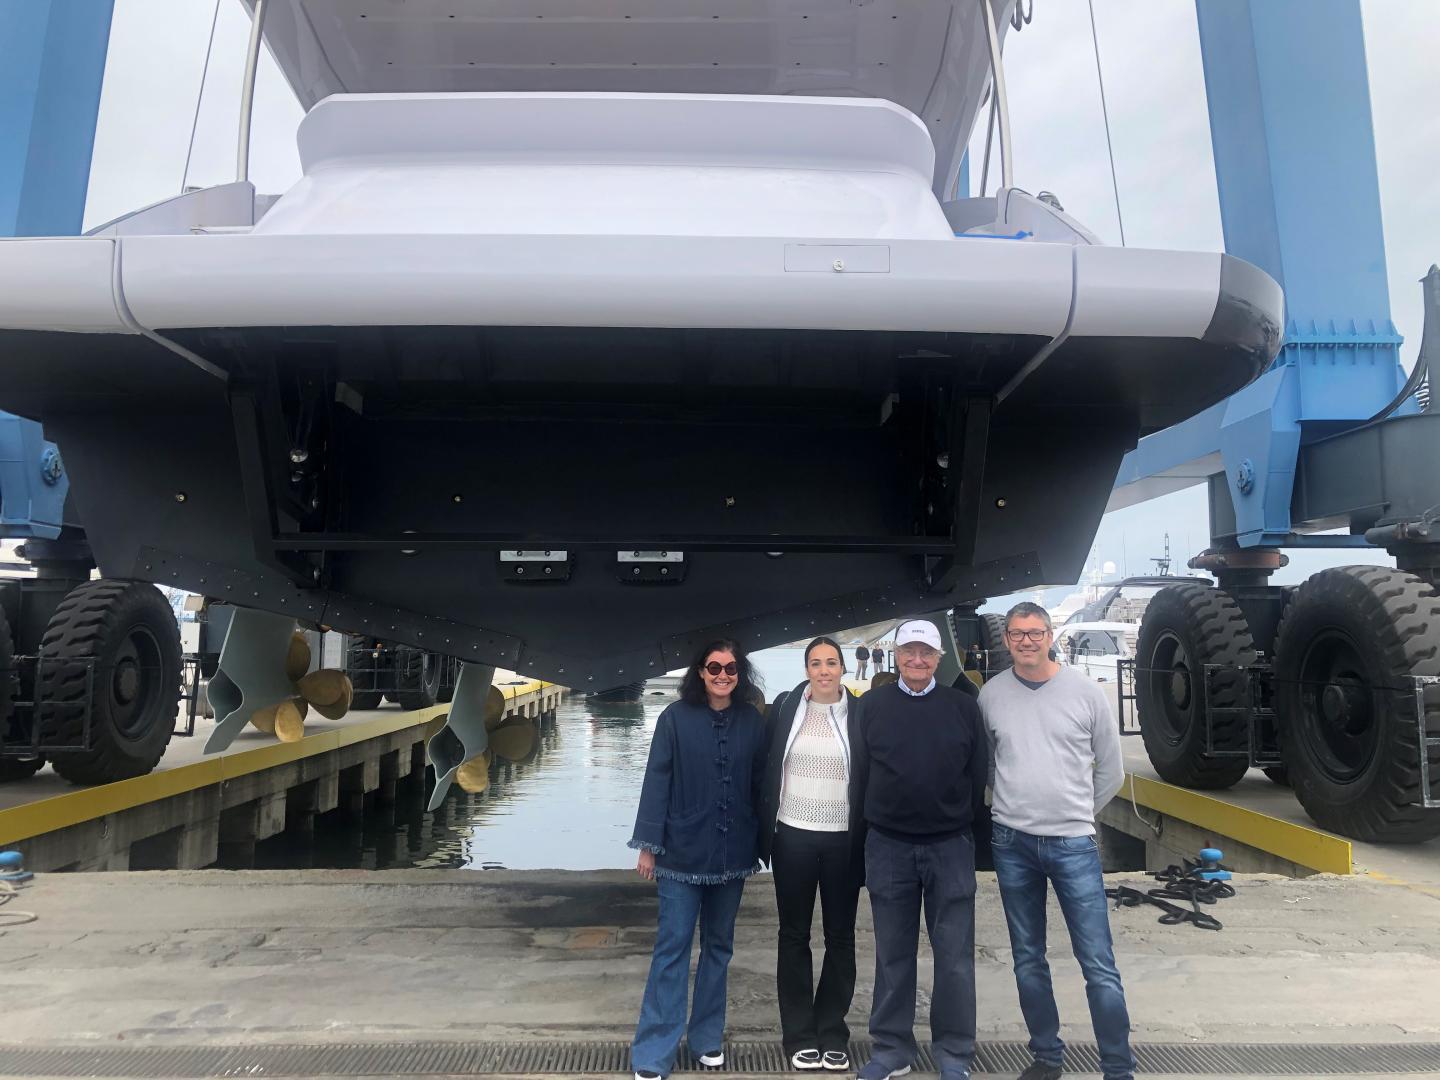 Amer Yachts Permare announce the launch of the last Amer Cento Quad